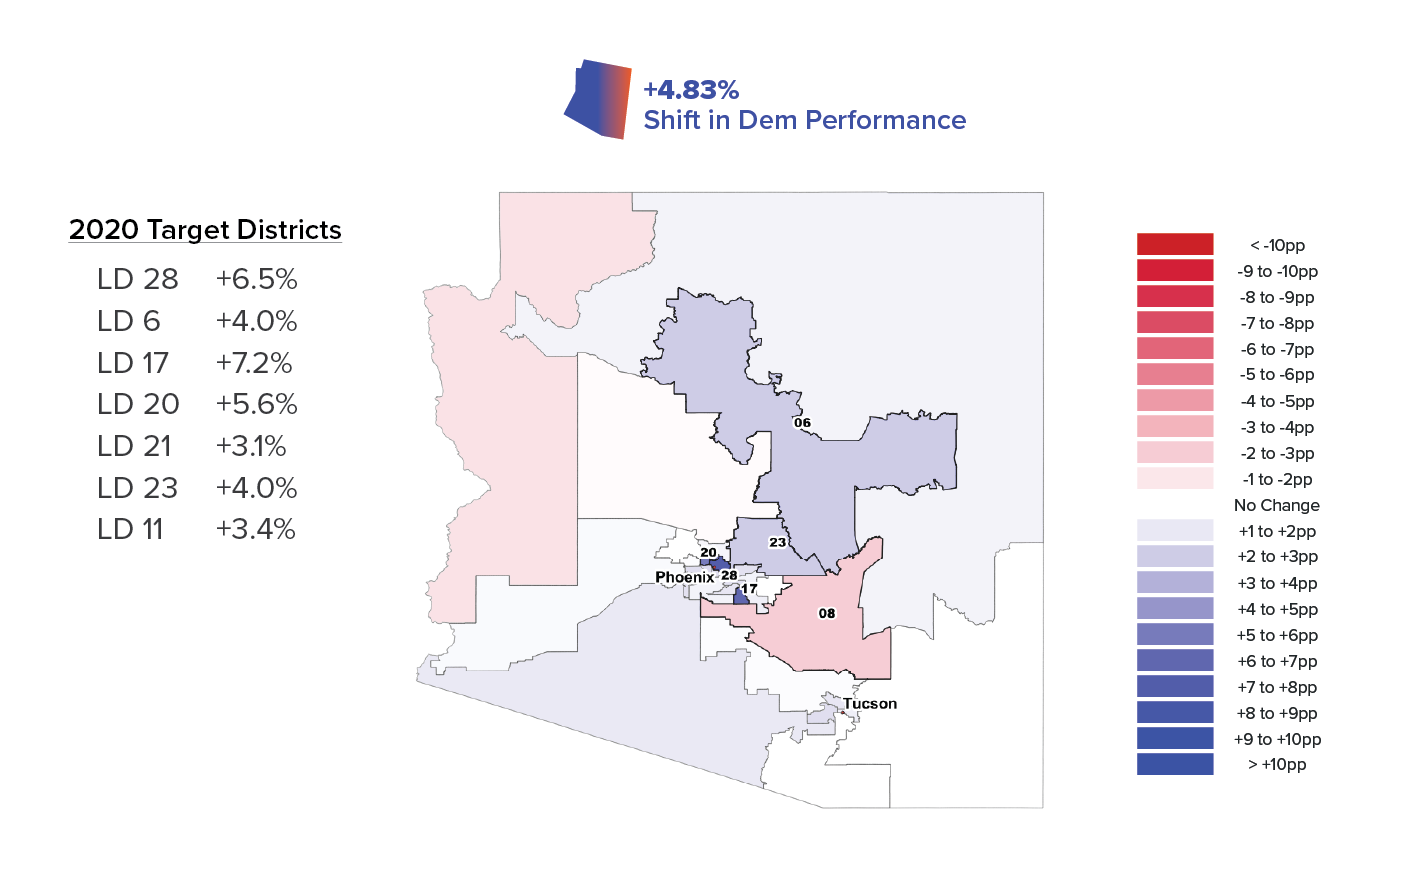 Dem Shift — Change in Dem Performance in Example Target Districts, 2010-2018As with Texas, Arizona’s 2020 target districts have seen steady improvement in Democratic performance since 2010, an average of 4.83%.